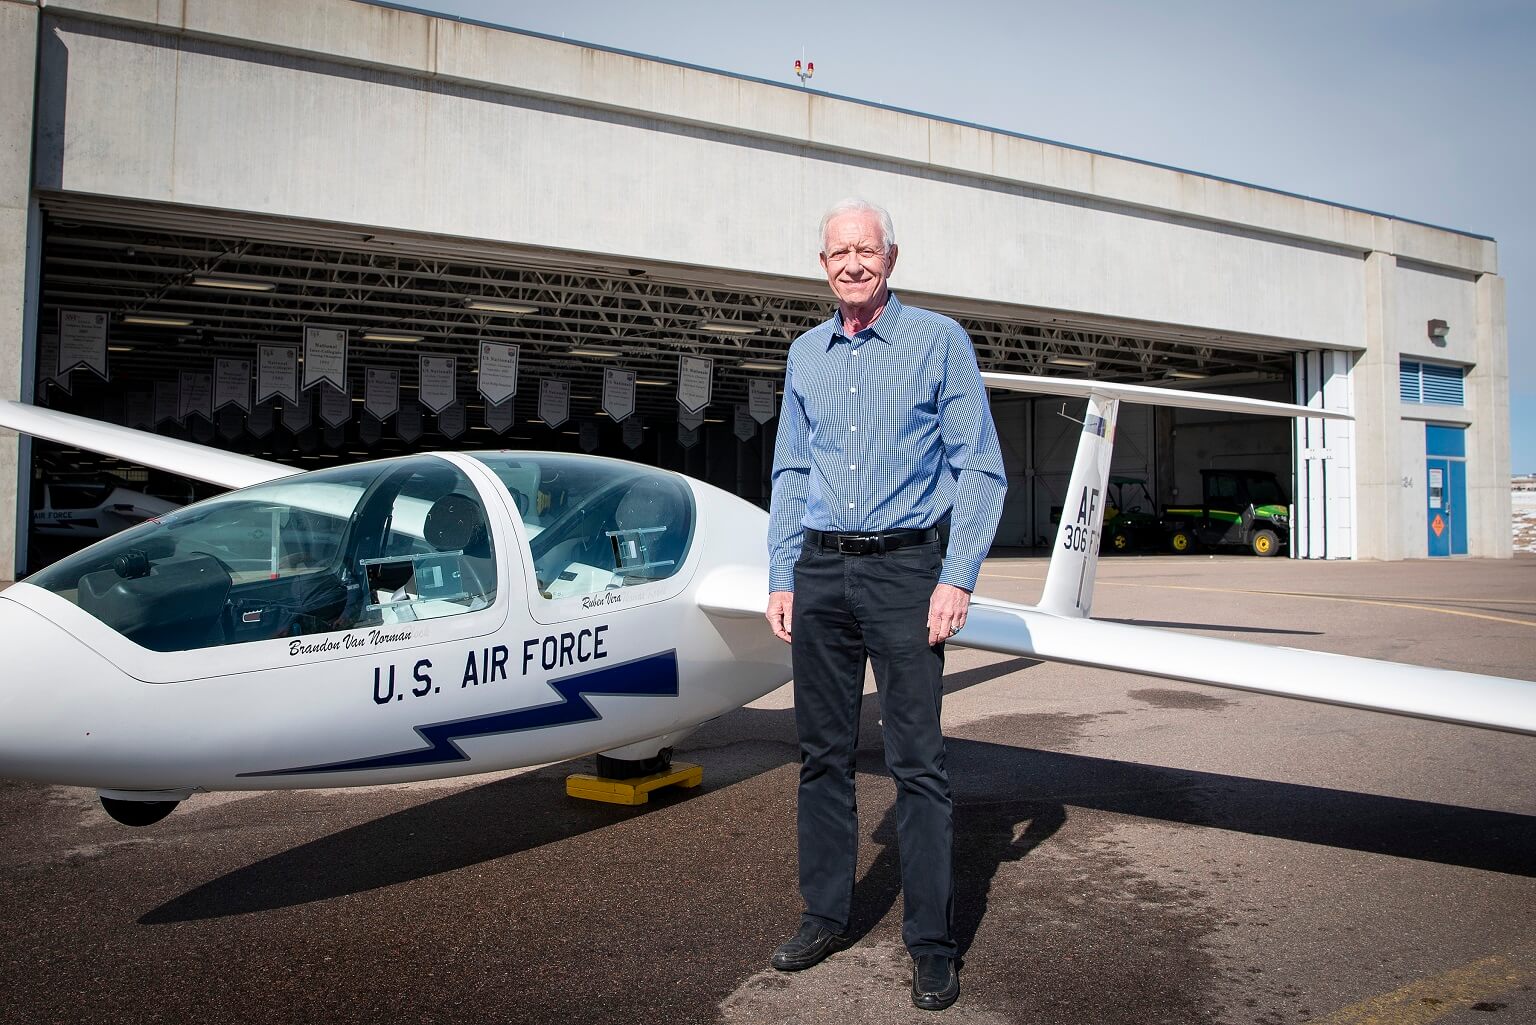 Sullenberger stands in front of an Air Force Academy glider at the Davis Airfield.